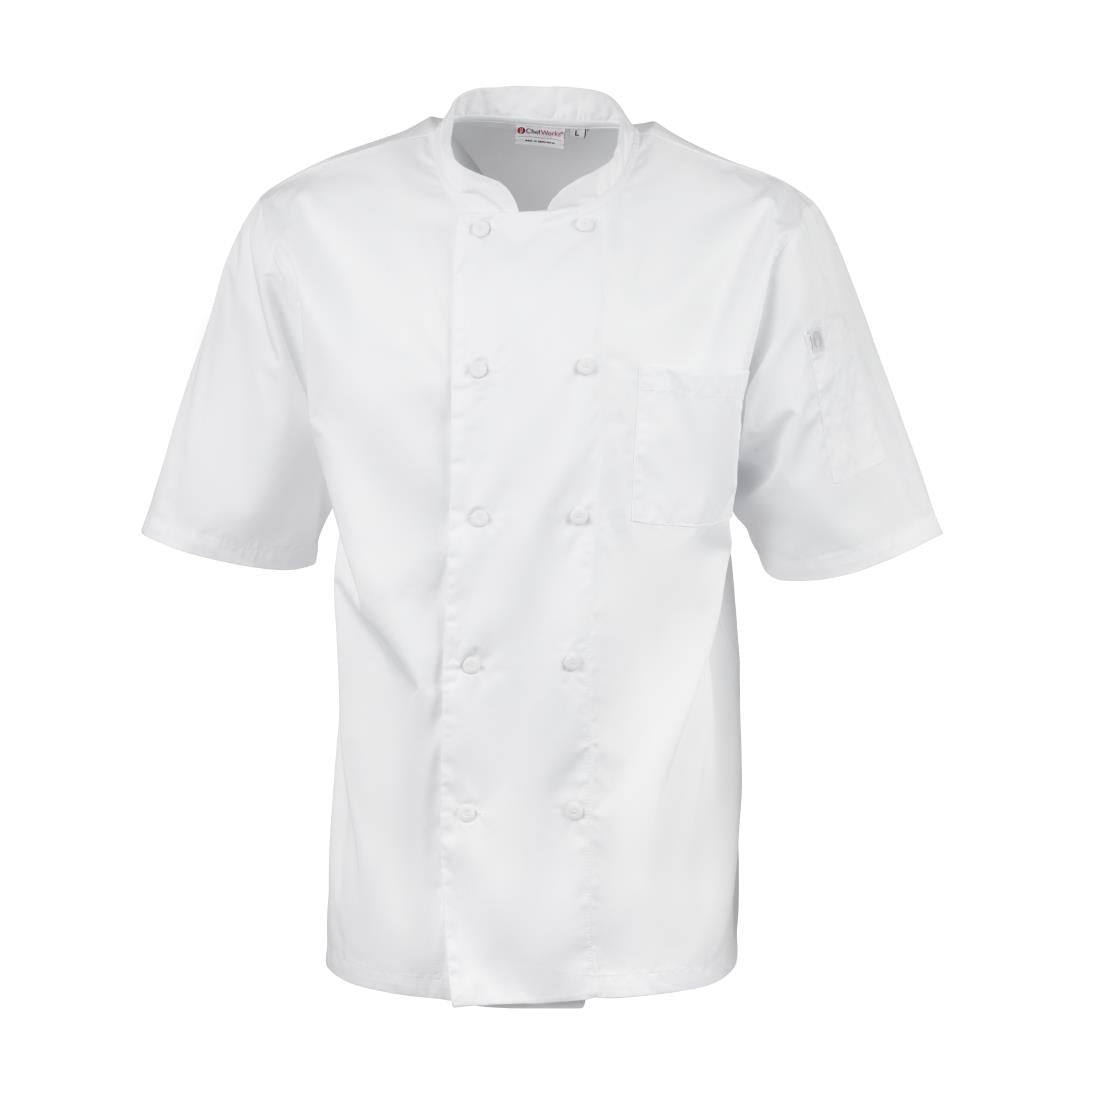 A914-3XL Chefs Works Montreal Cool Vent Unisex Short Sleeve Chefs Jacket White 3XL